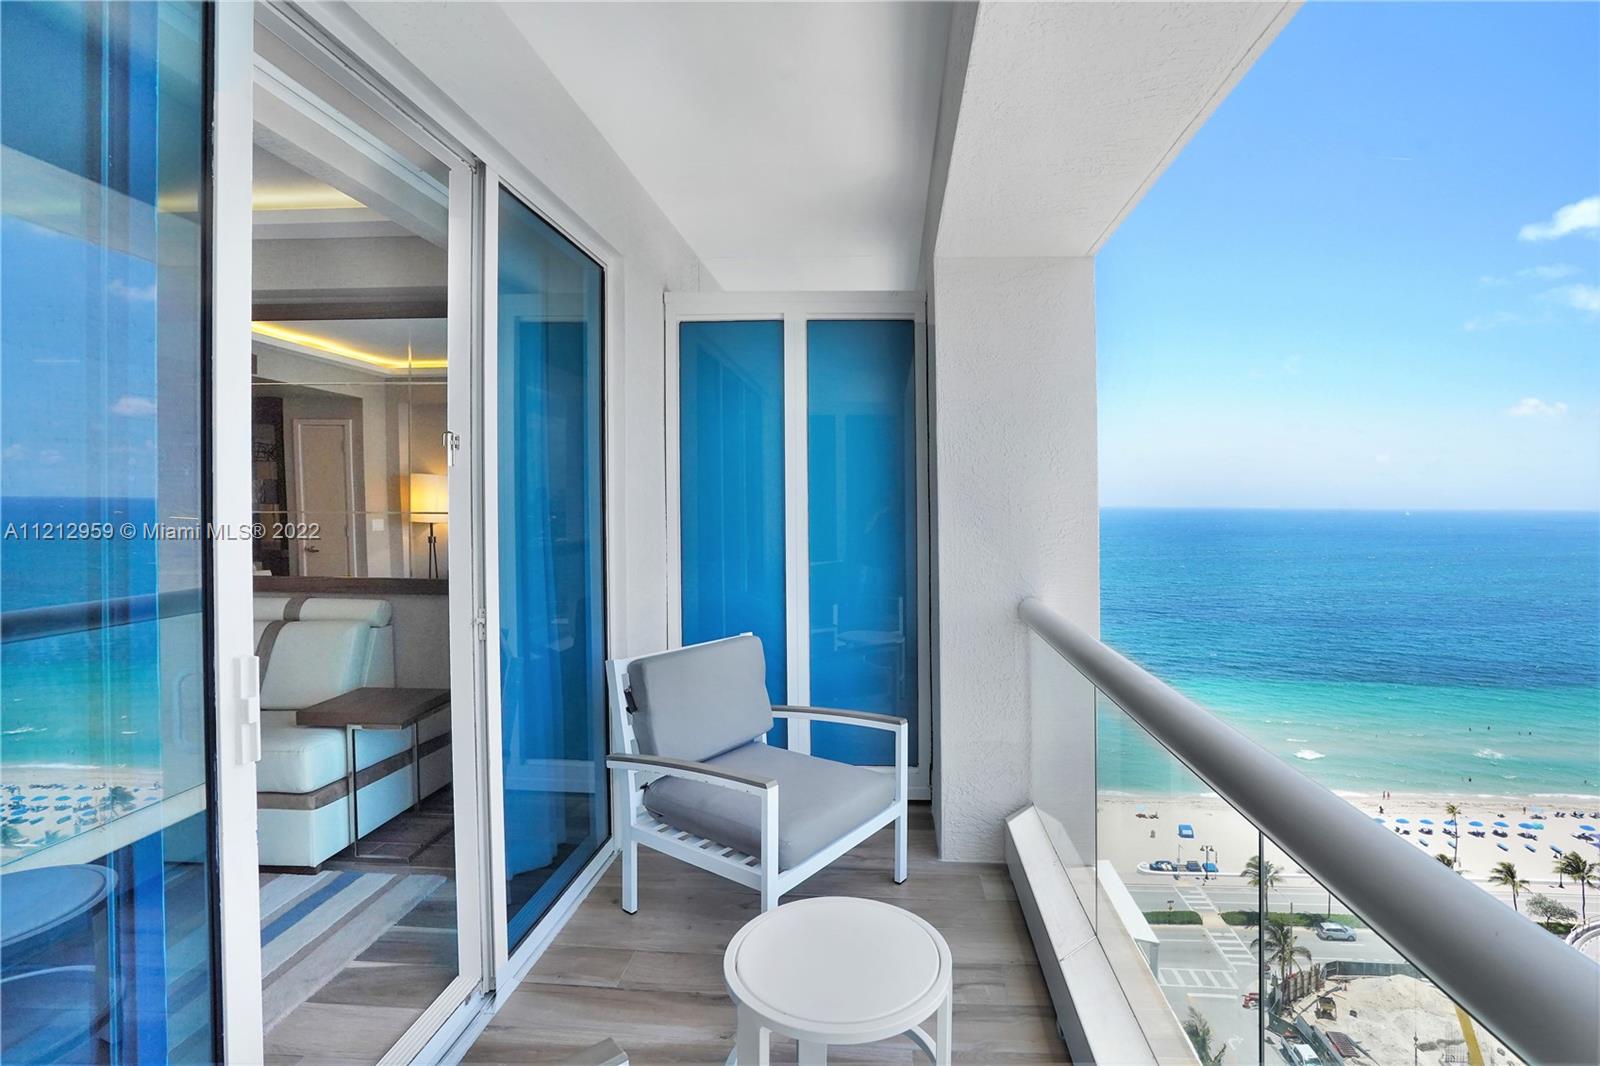 Discover the Ultimate Luxury: Fort Lauderdale Penthouses for Sale - WriteUpCafe.com